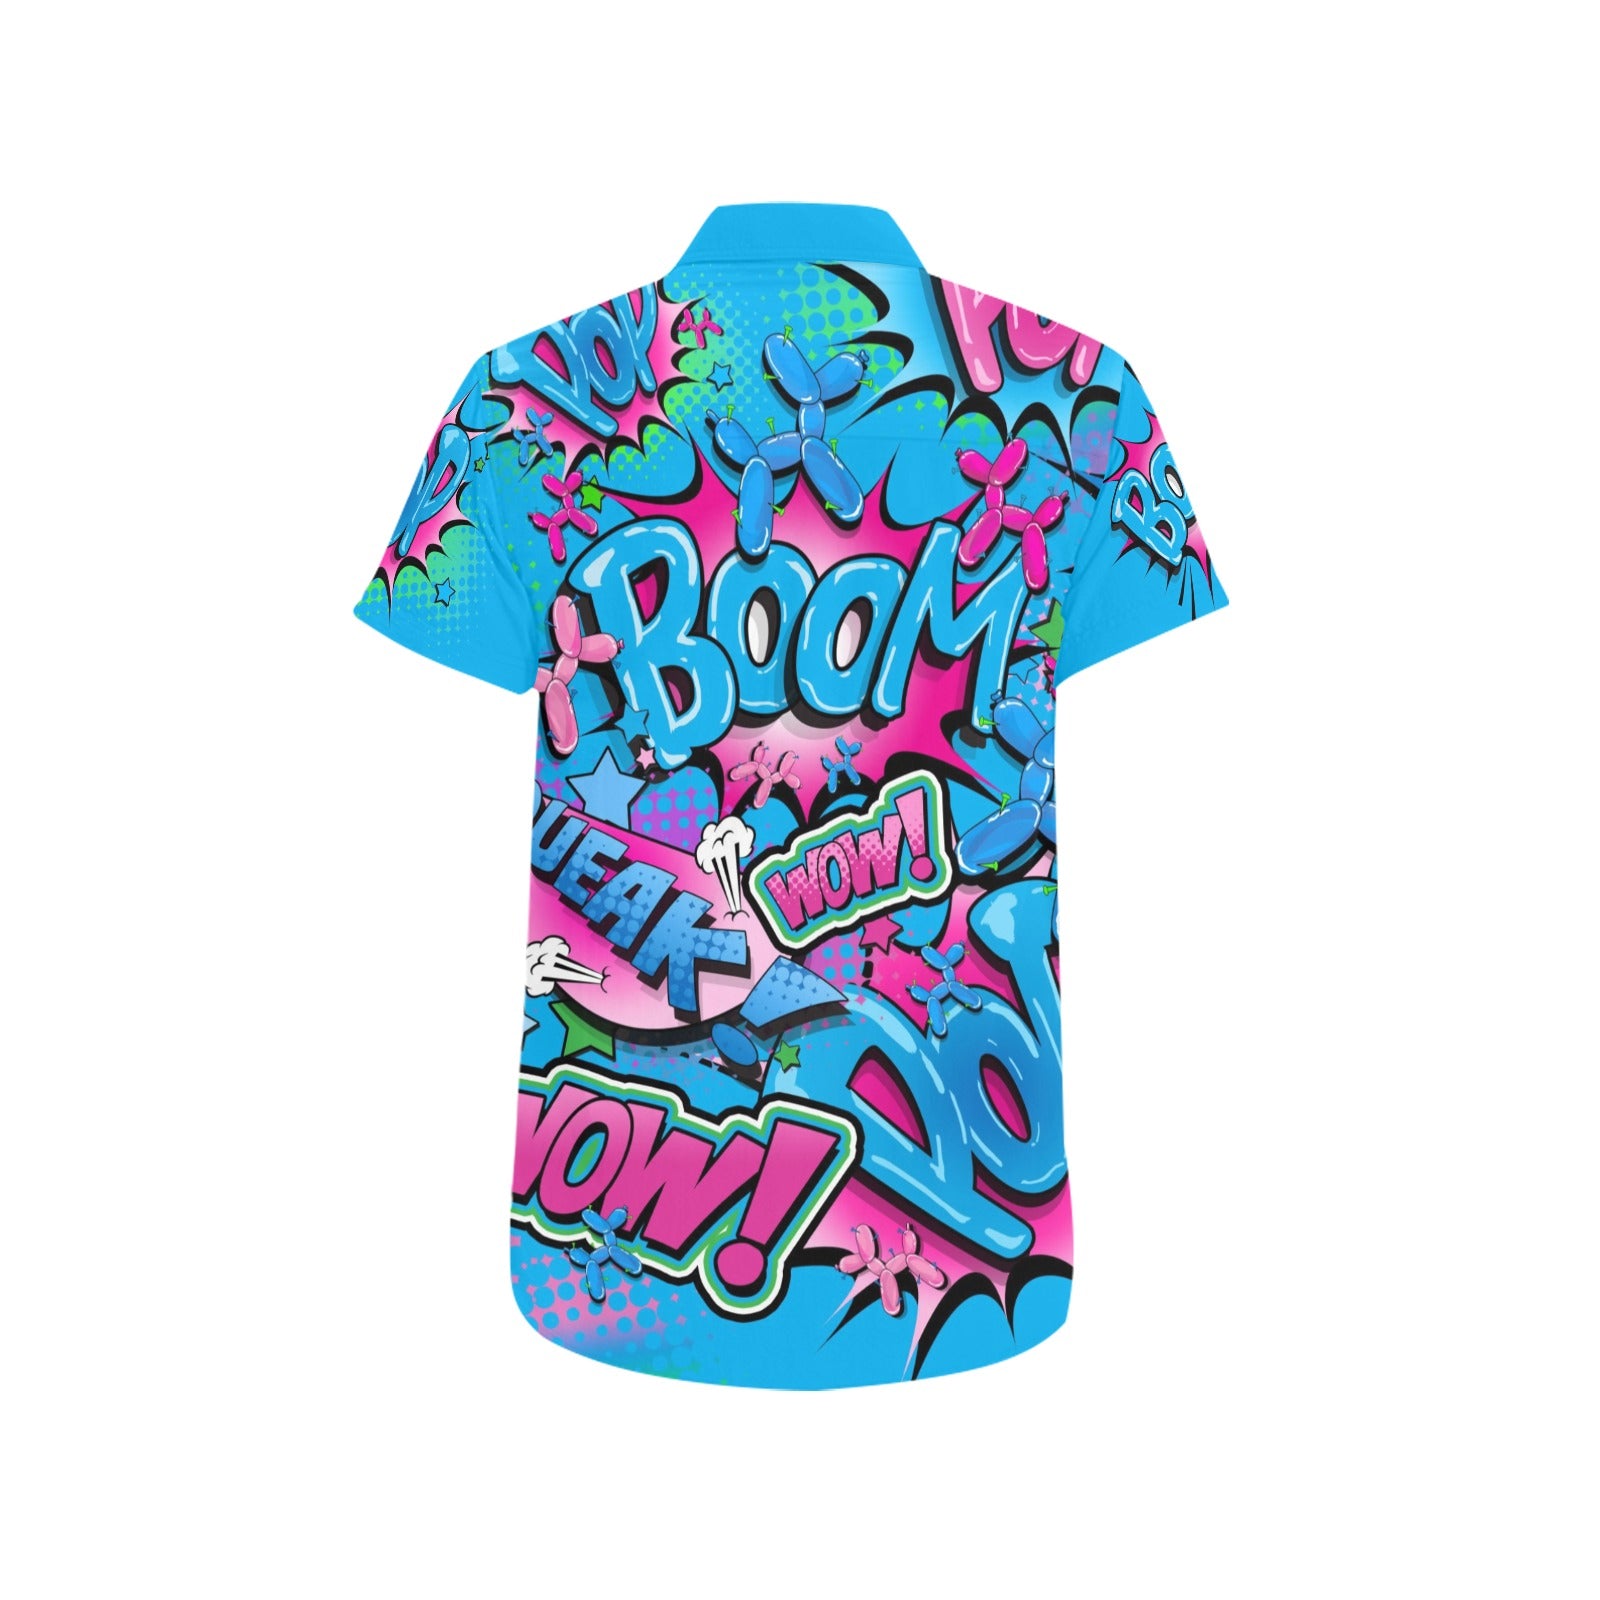 Blue and pink balloon dog shirt for professional balloon twisters